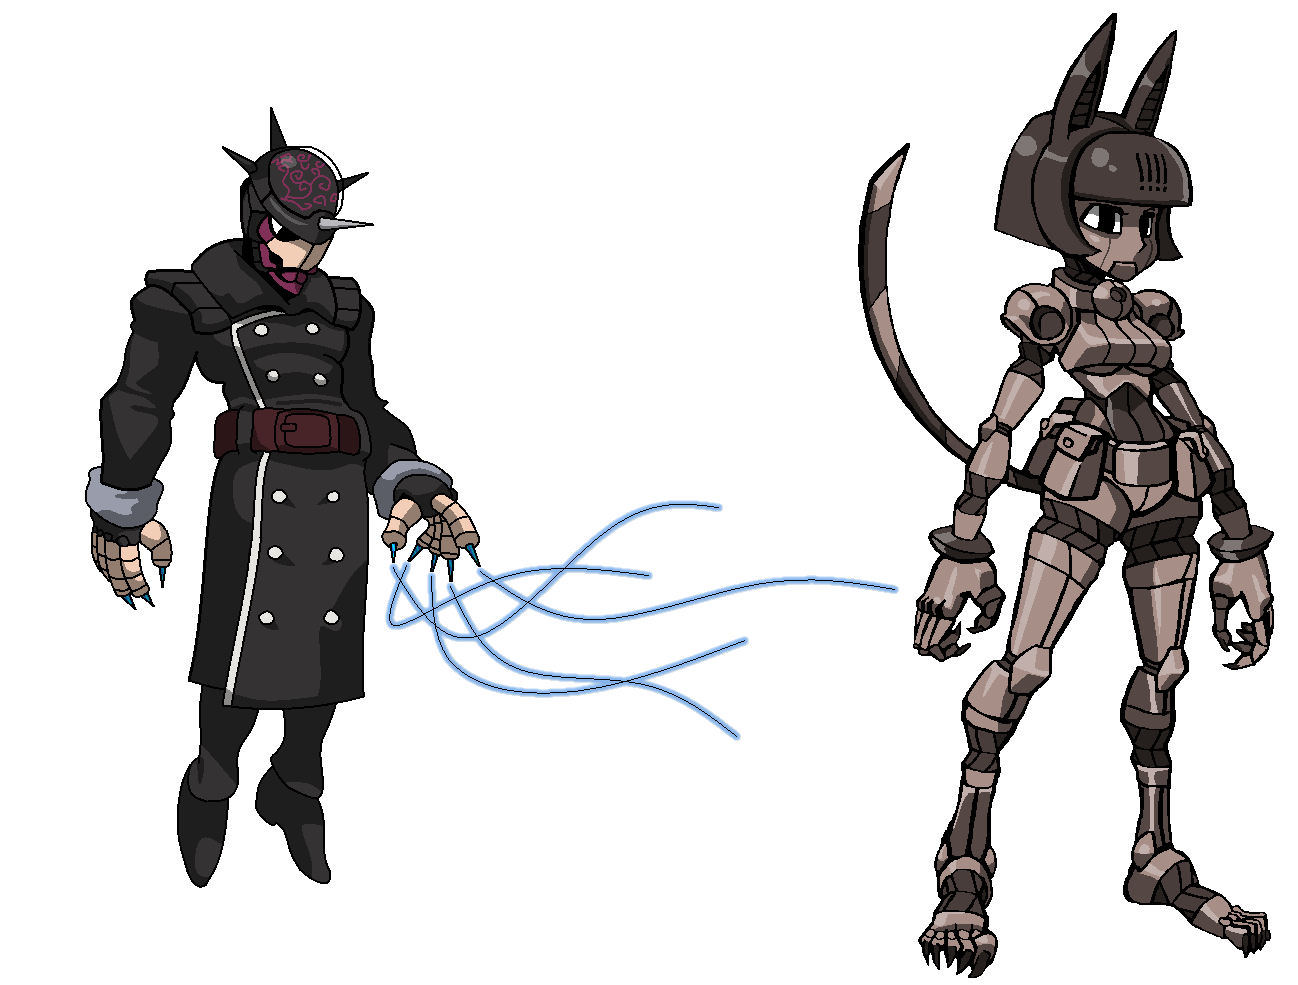 brain_drain_and_robo_fortune___kankuro_and_puppet_by_mariokonga-d8t3i57.png